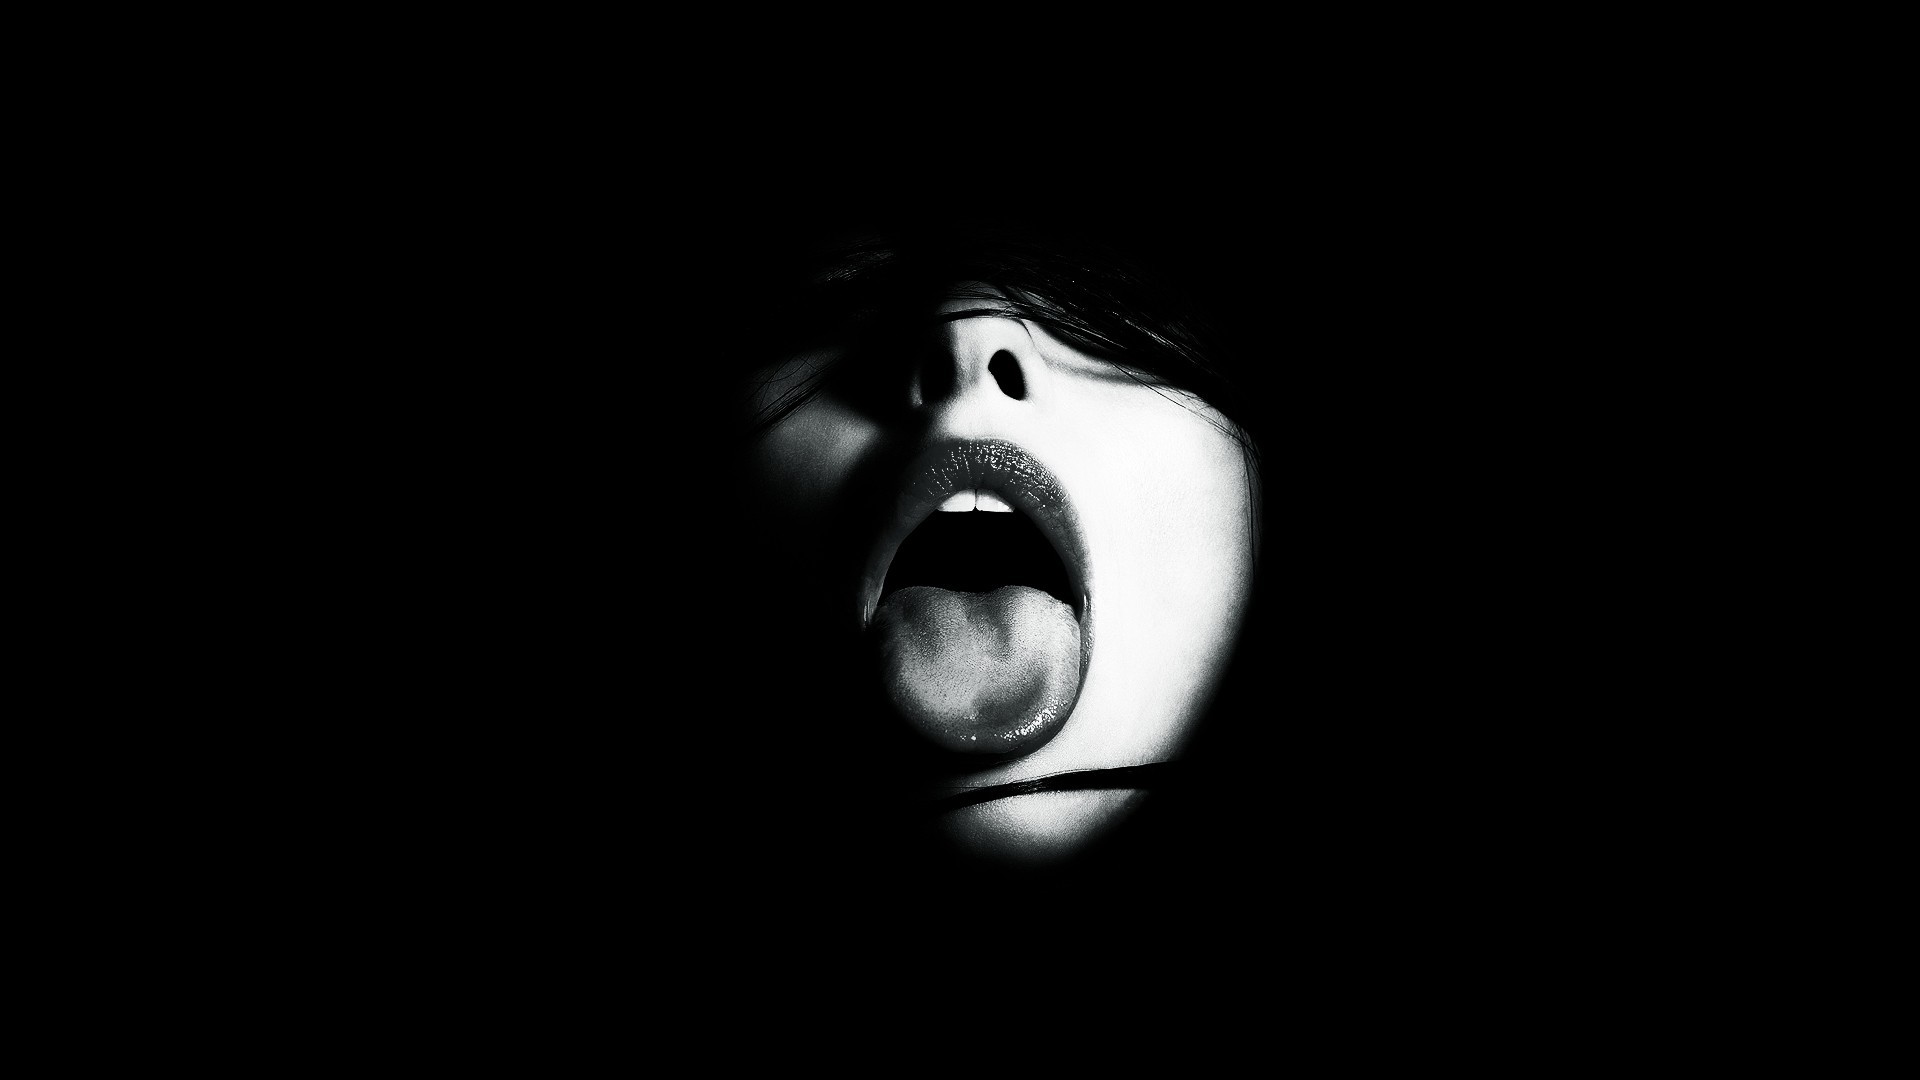 General 1920x1080 open mouth suggestive women tongues model minimalism simple background black background hair in face tongue out